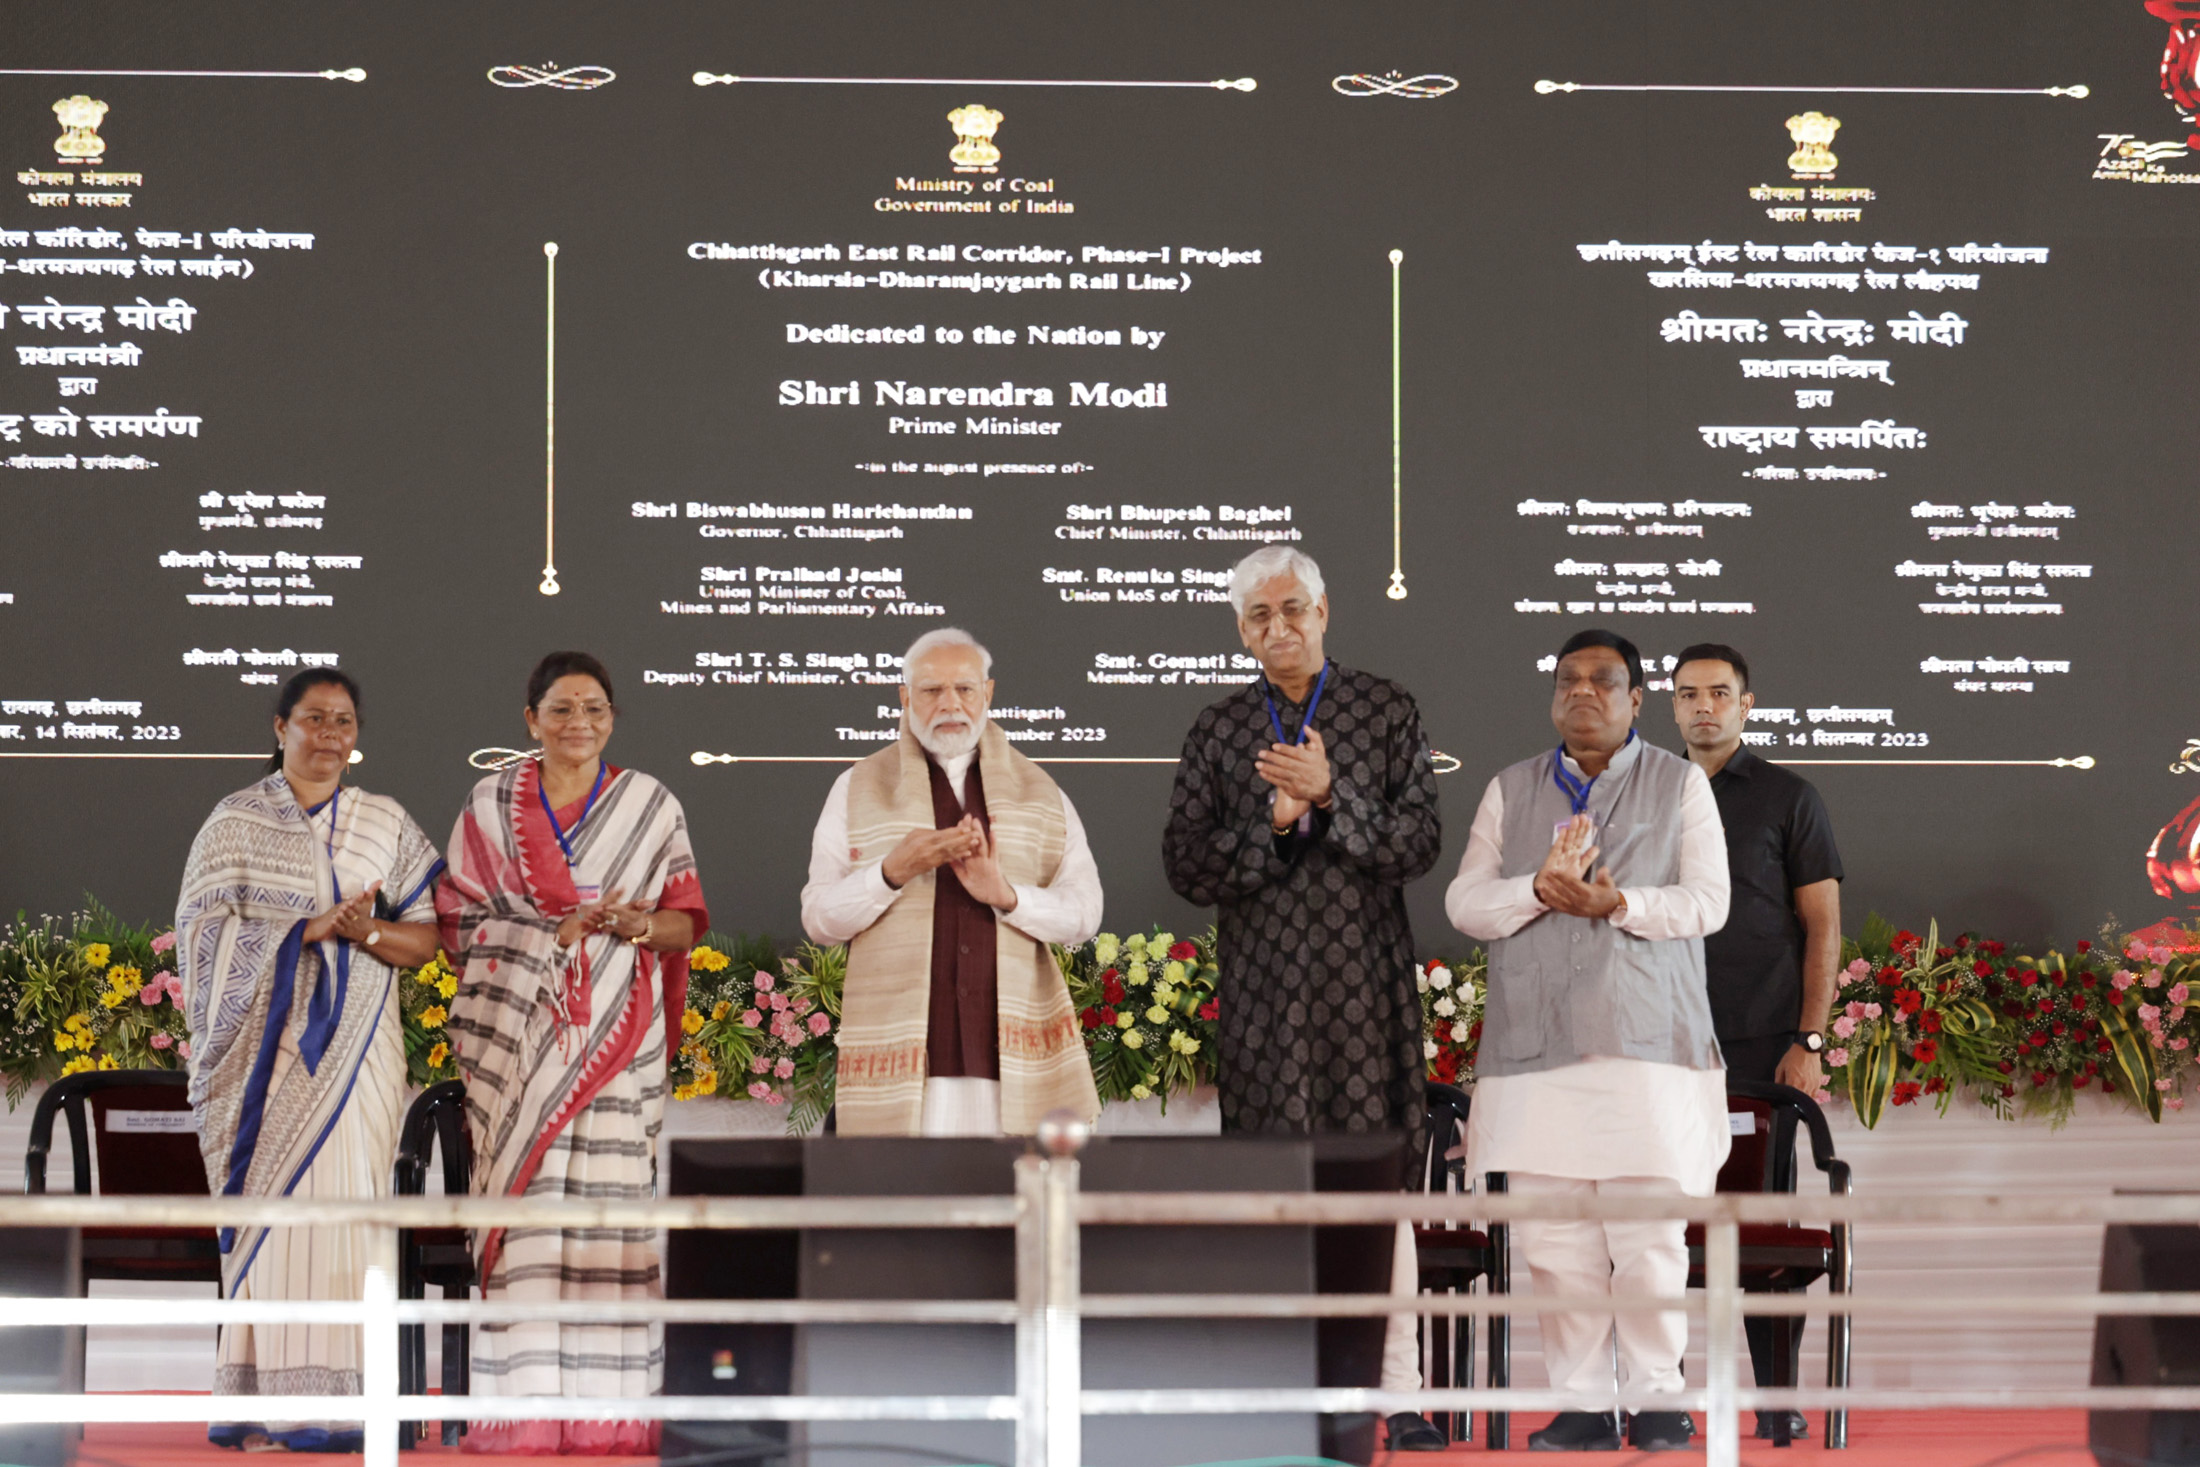 PM at laying the foundation stone of Railway projects at Raigarh, in Chhattisgarh on September 14, 2023.